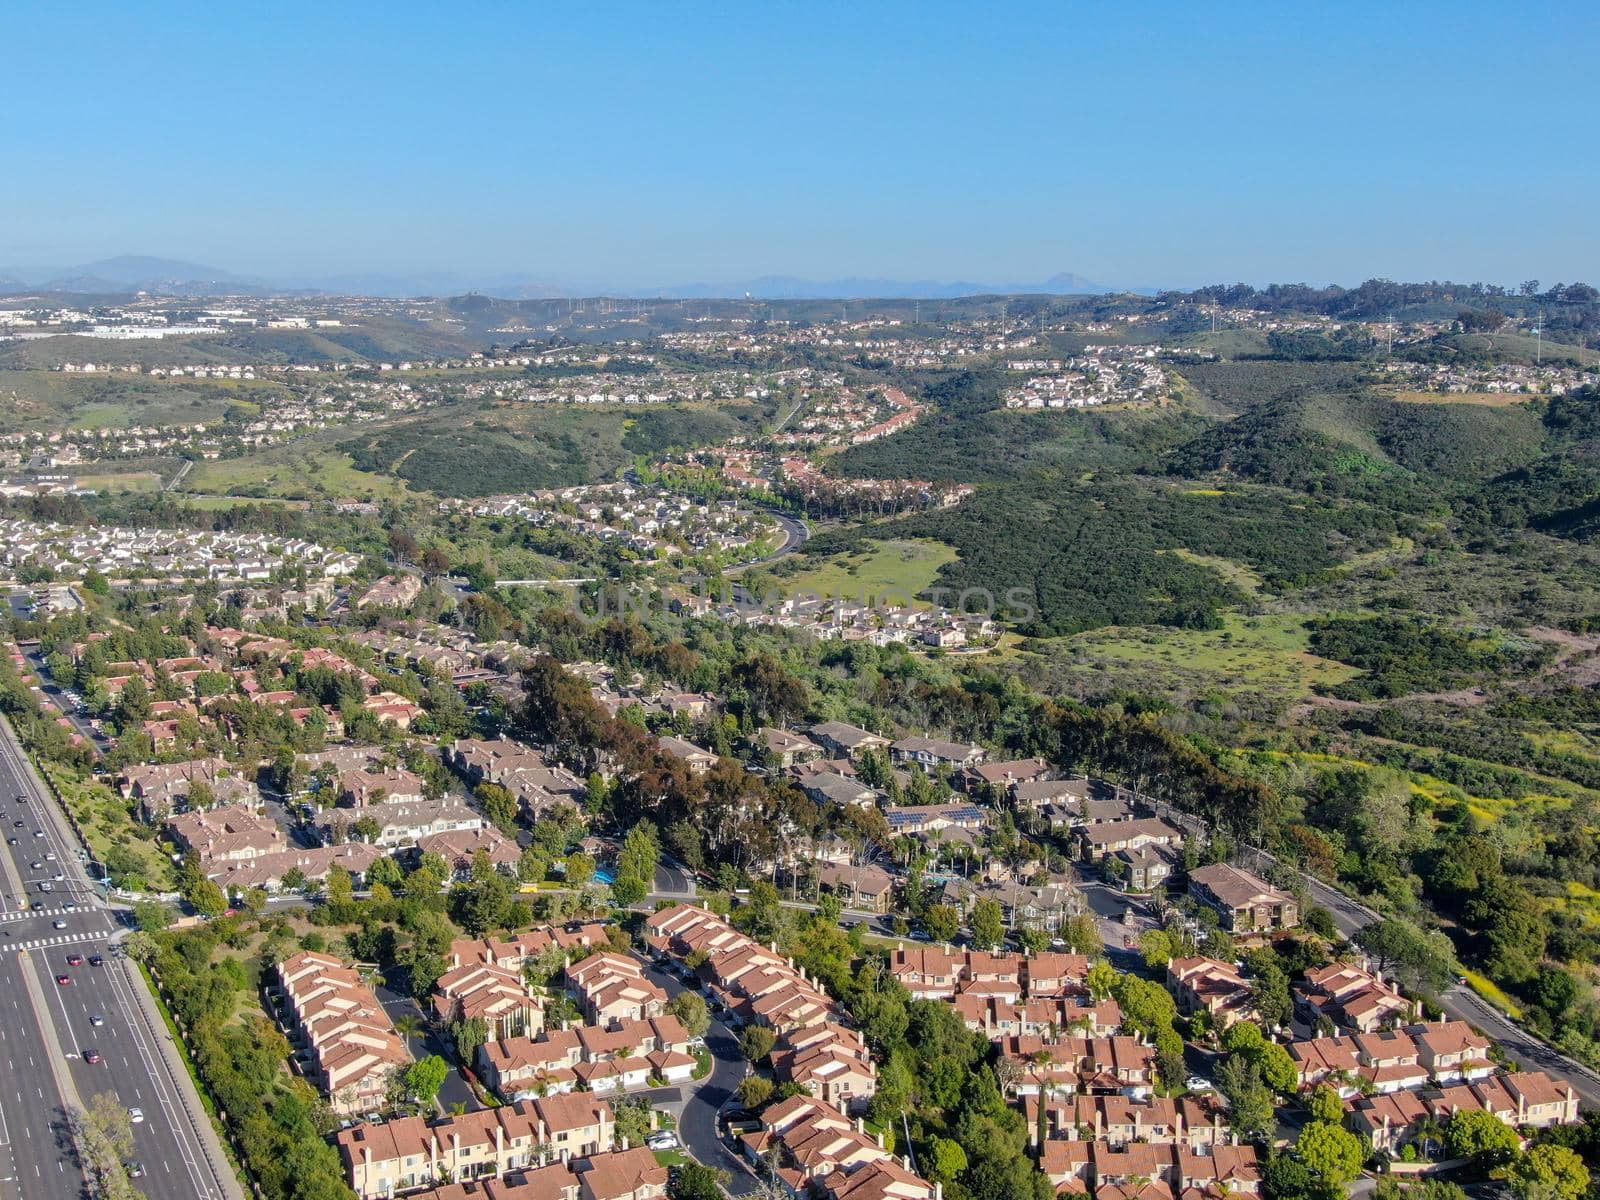 Aerial view of upper middle class neighborhood with big villas around in San Diego, California, USA.